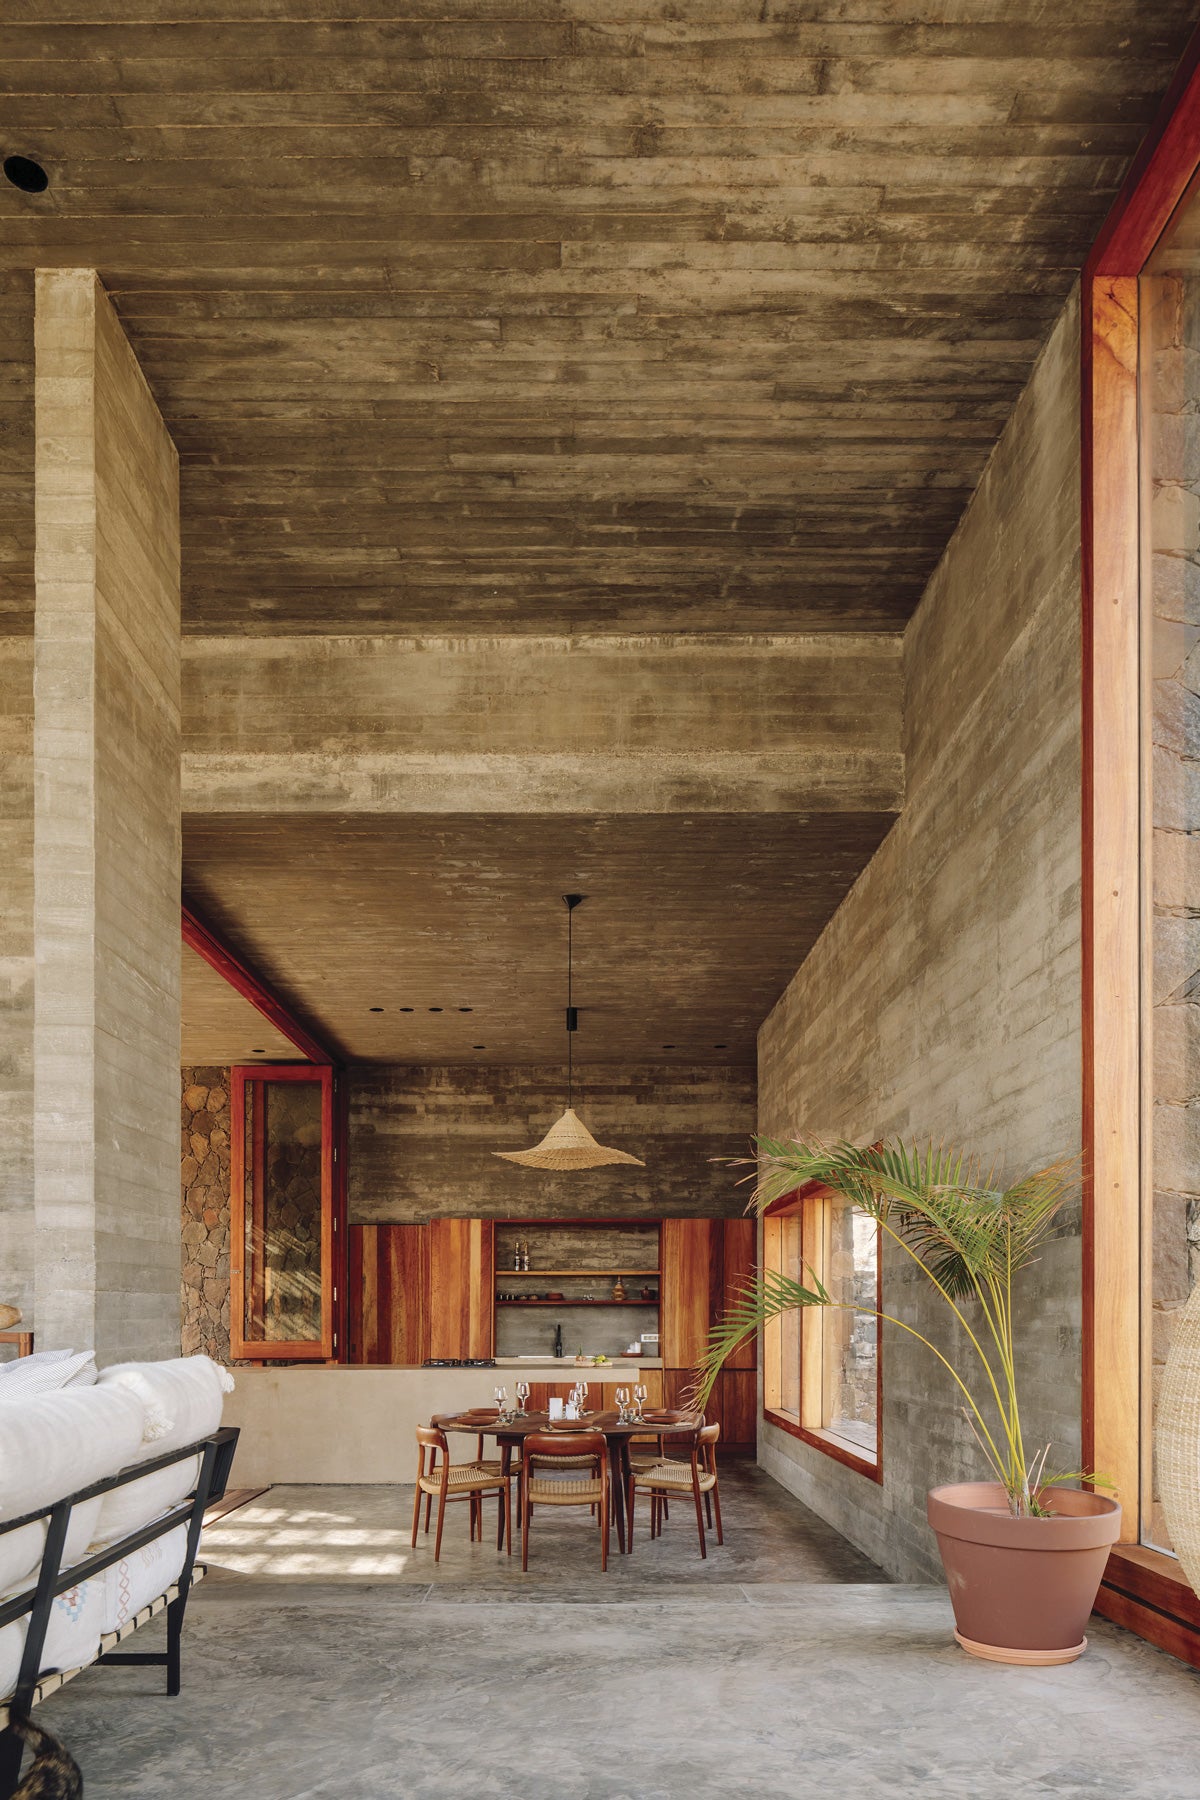 The design studio has added a selection of furniture in natural hues to the interior decoration of the villas, featuring concrete surfaces and planks. The wood, also in warm tones, is used for making cabinets and window frames. The high pergolas are finished with rattan strips, which offer shade to the deck chairs.